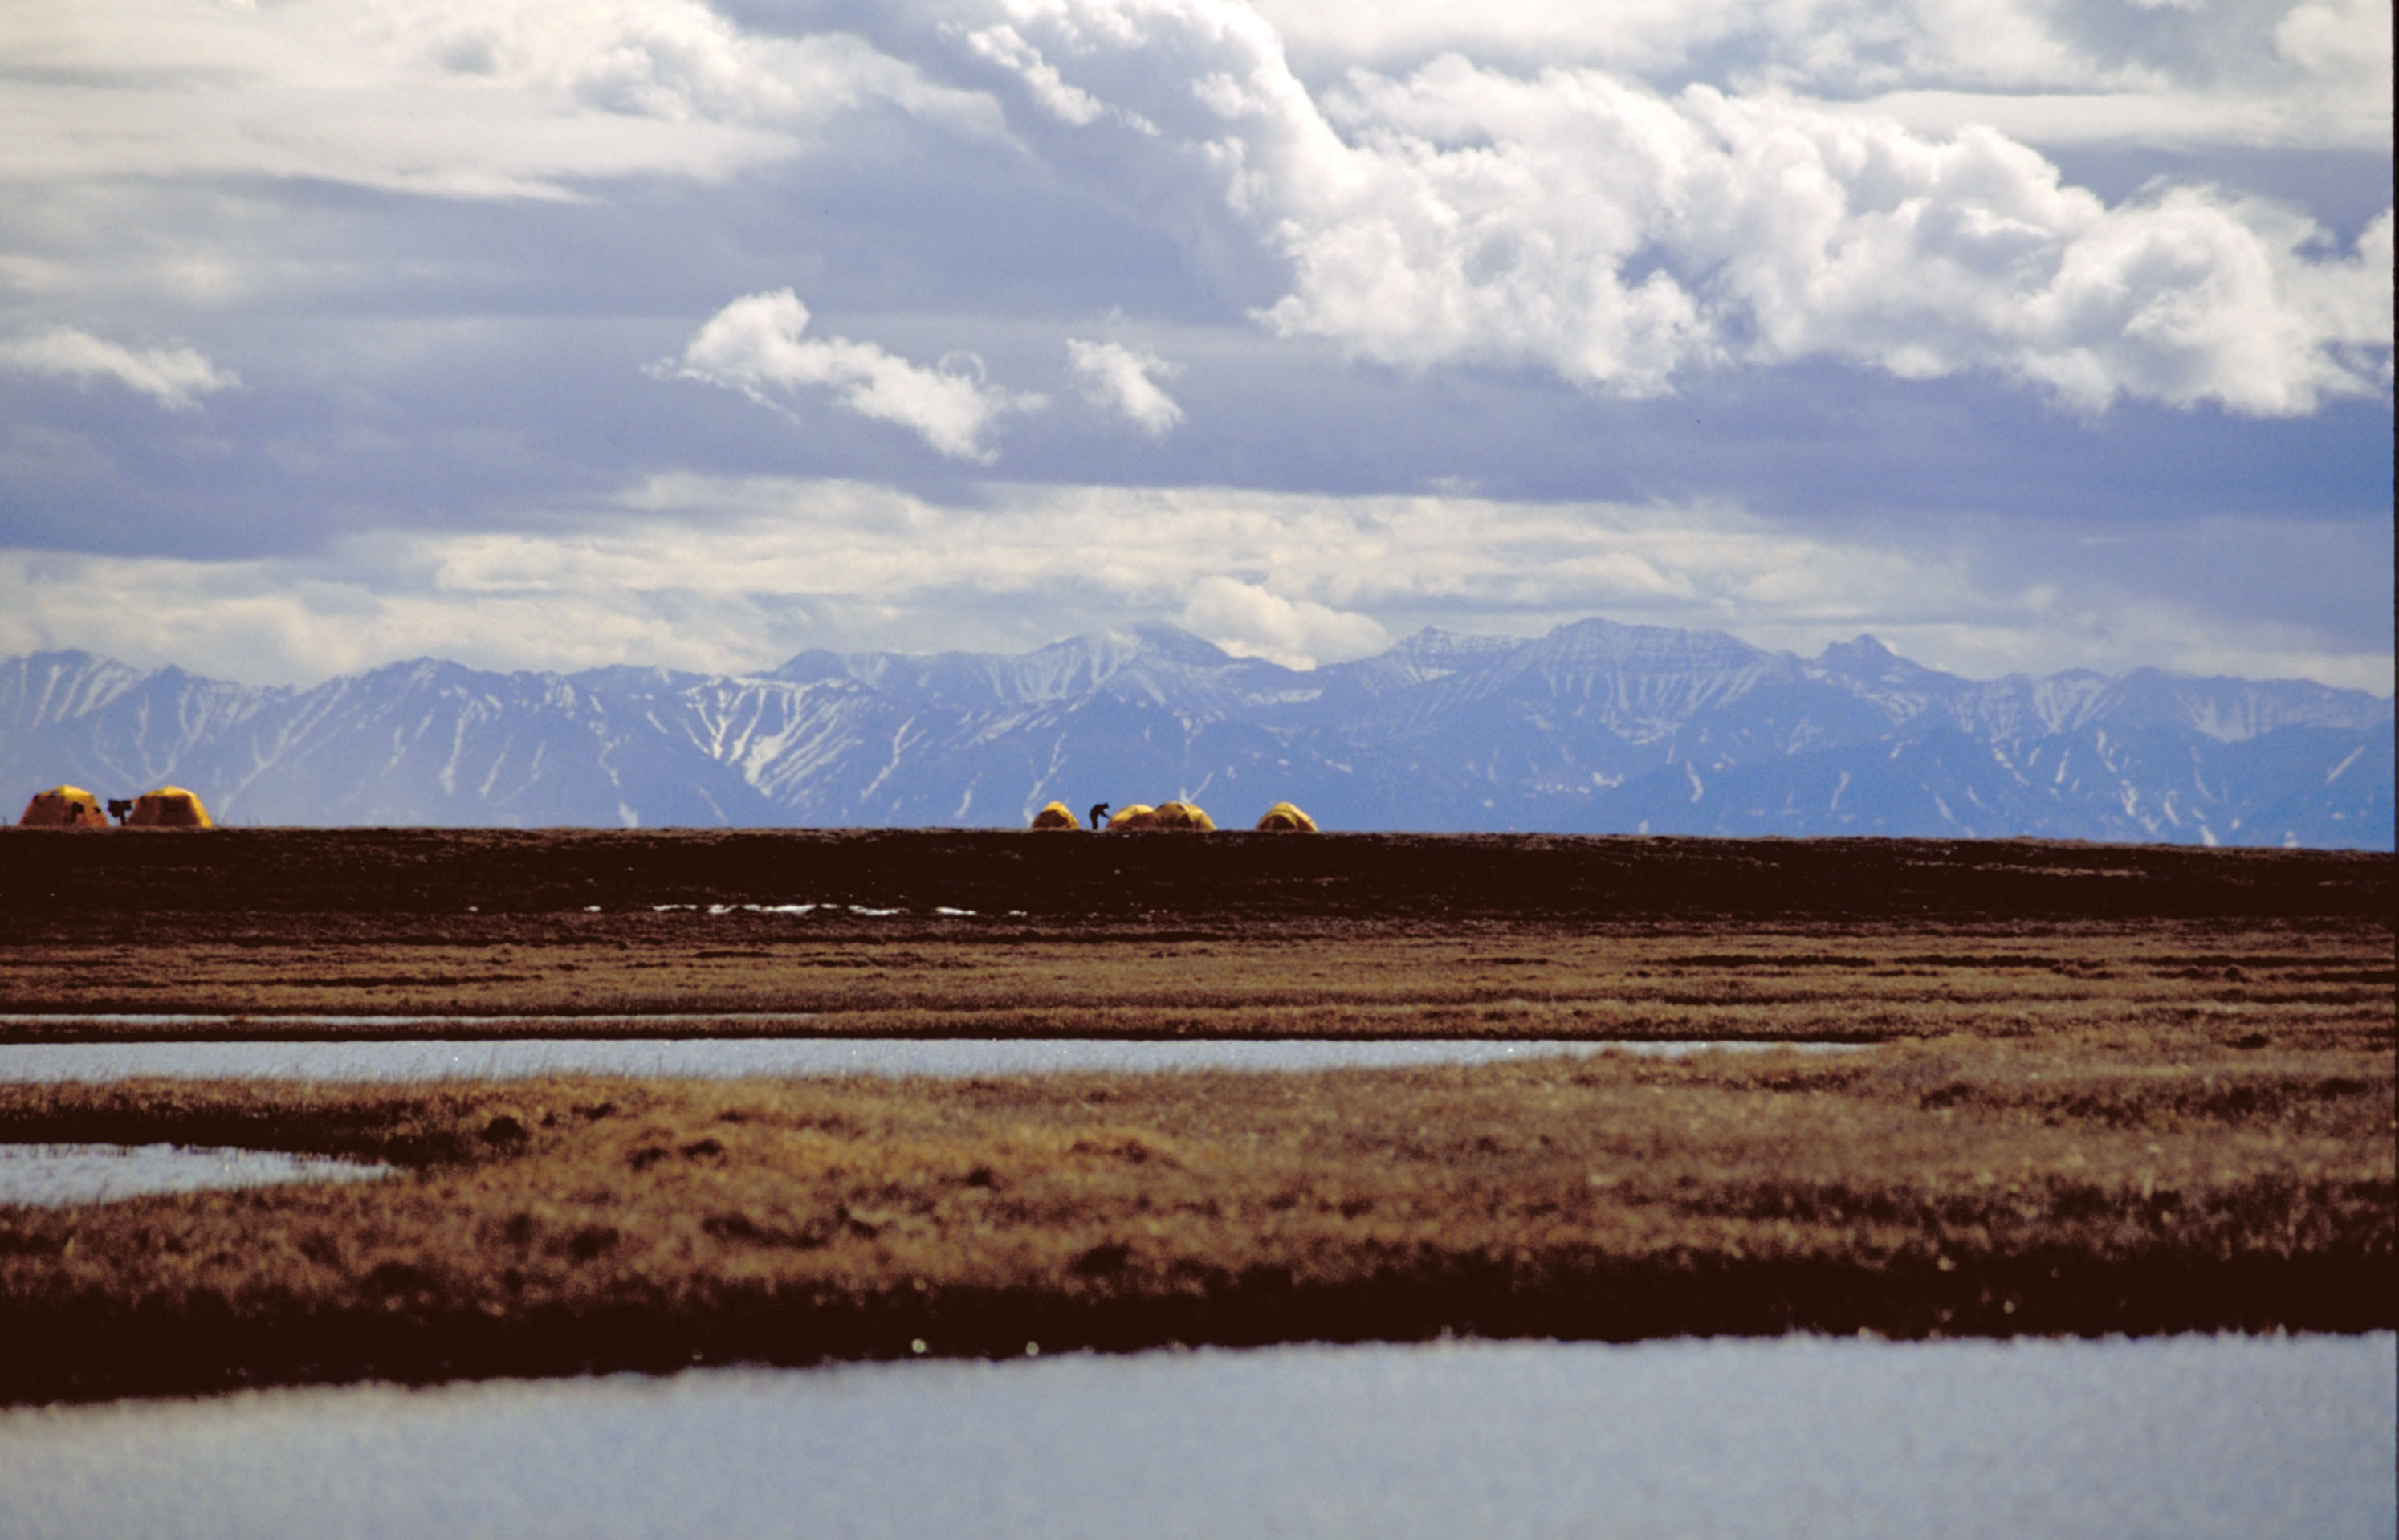 Bird research camp is seen within the 1002 Area of the Arctic National Wildlife Refuge